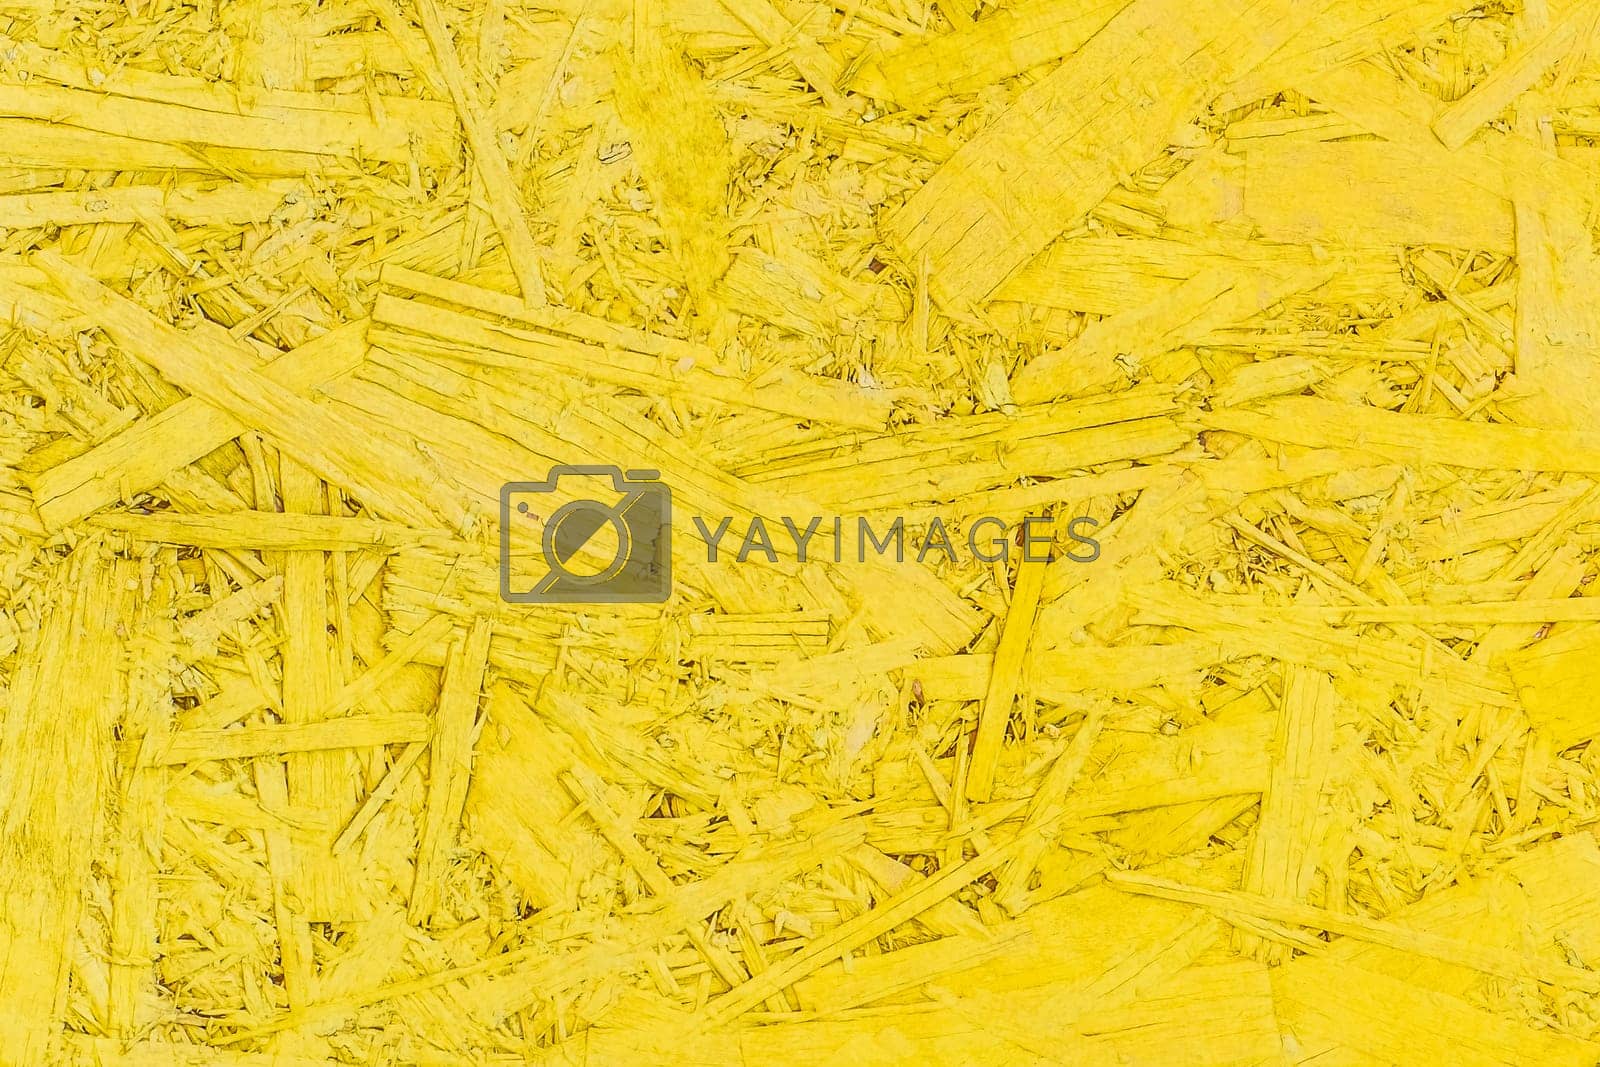 Royalty free image of Yellow paint pressed wood texture, chipboard light bright vibrant surface background osb particleboard by AYDO8